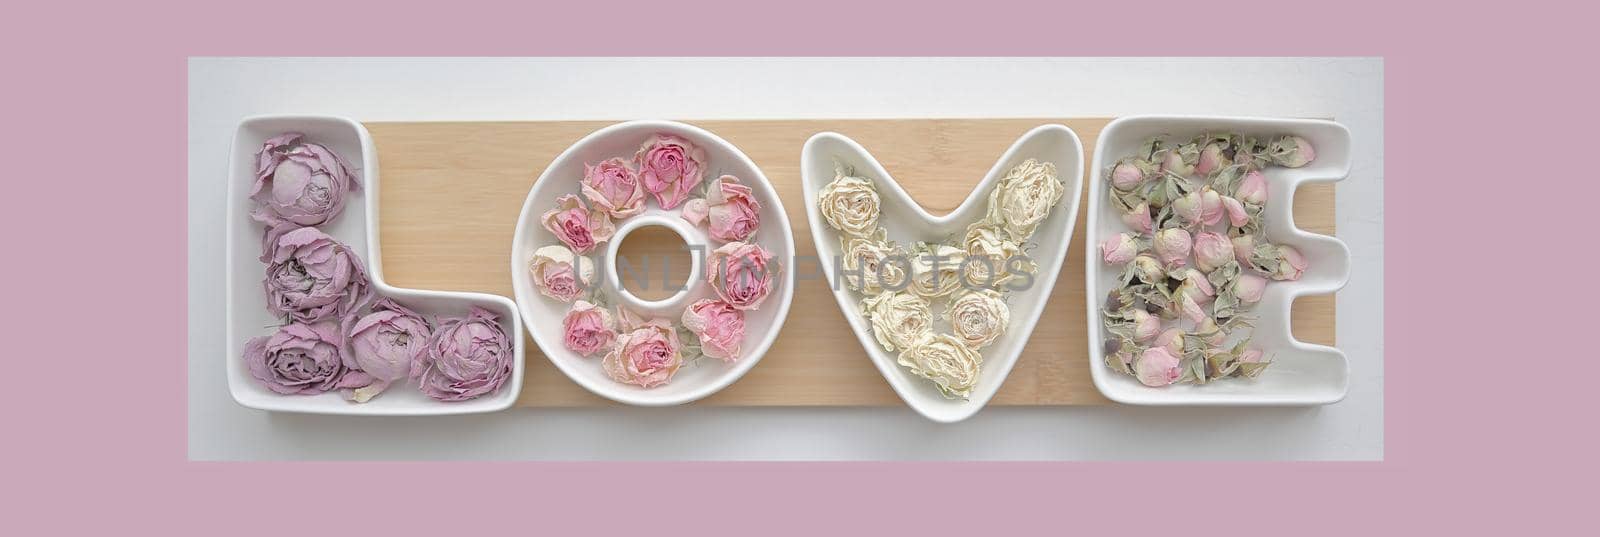 Valentine's day and love concept. The word love is made up of white porcelain molds filled with rosebuds against a soft delicate pink background